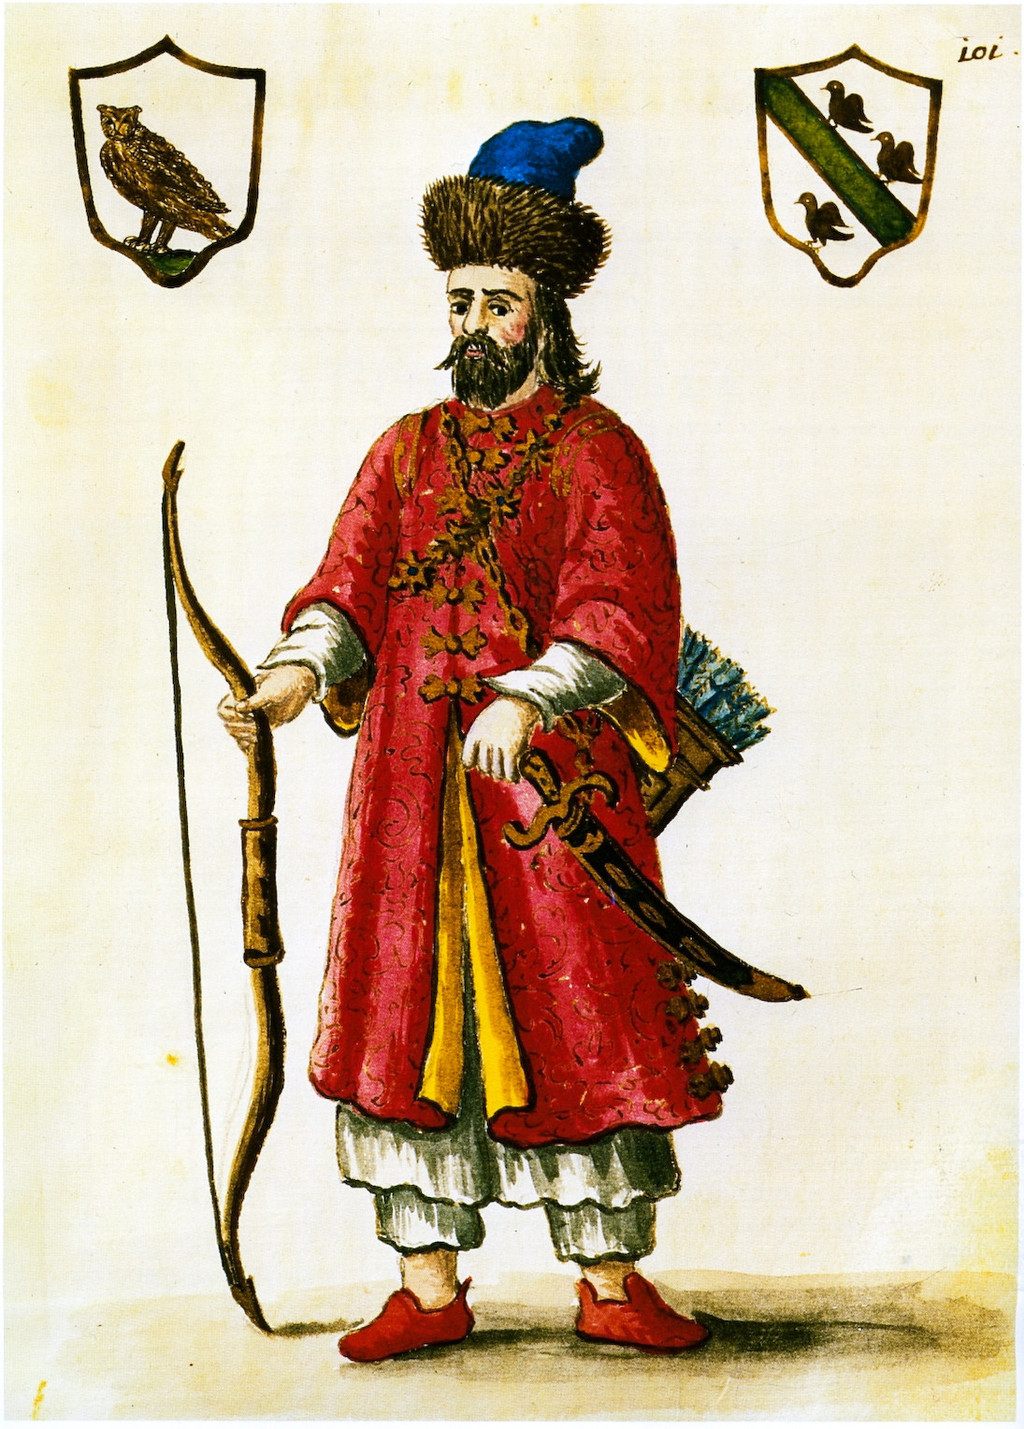 Marco Polo in a Tatar costume